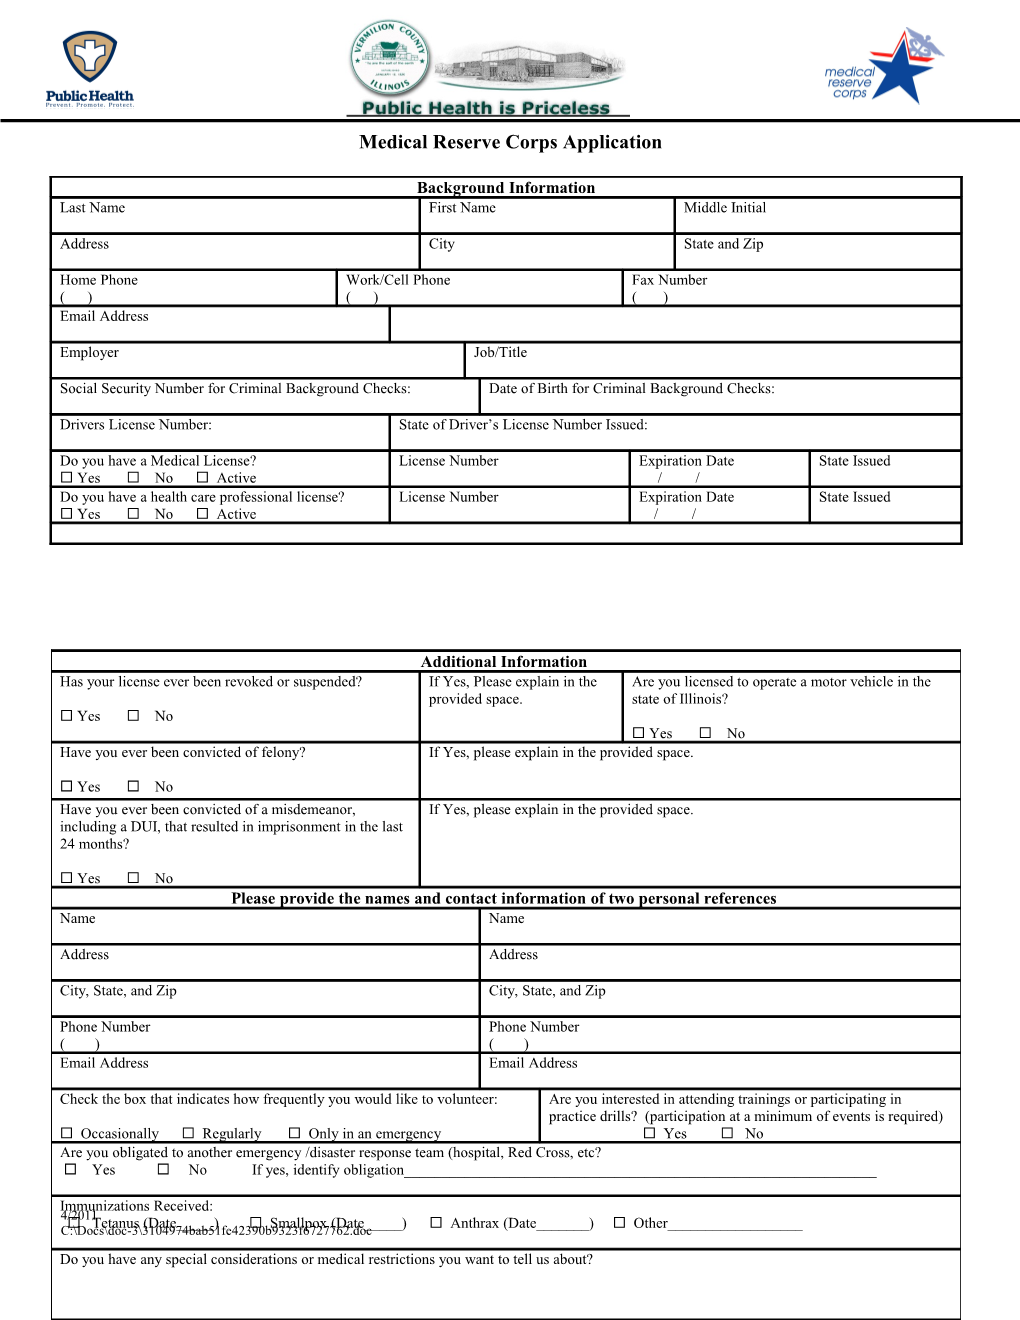 Medical Reserve Corps Application